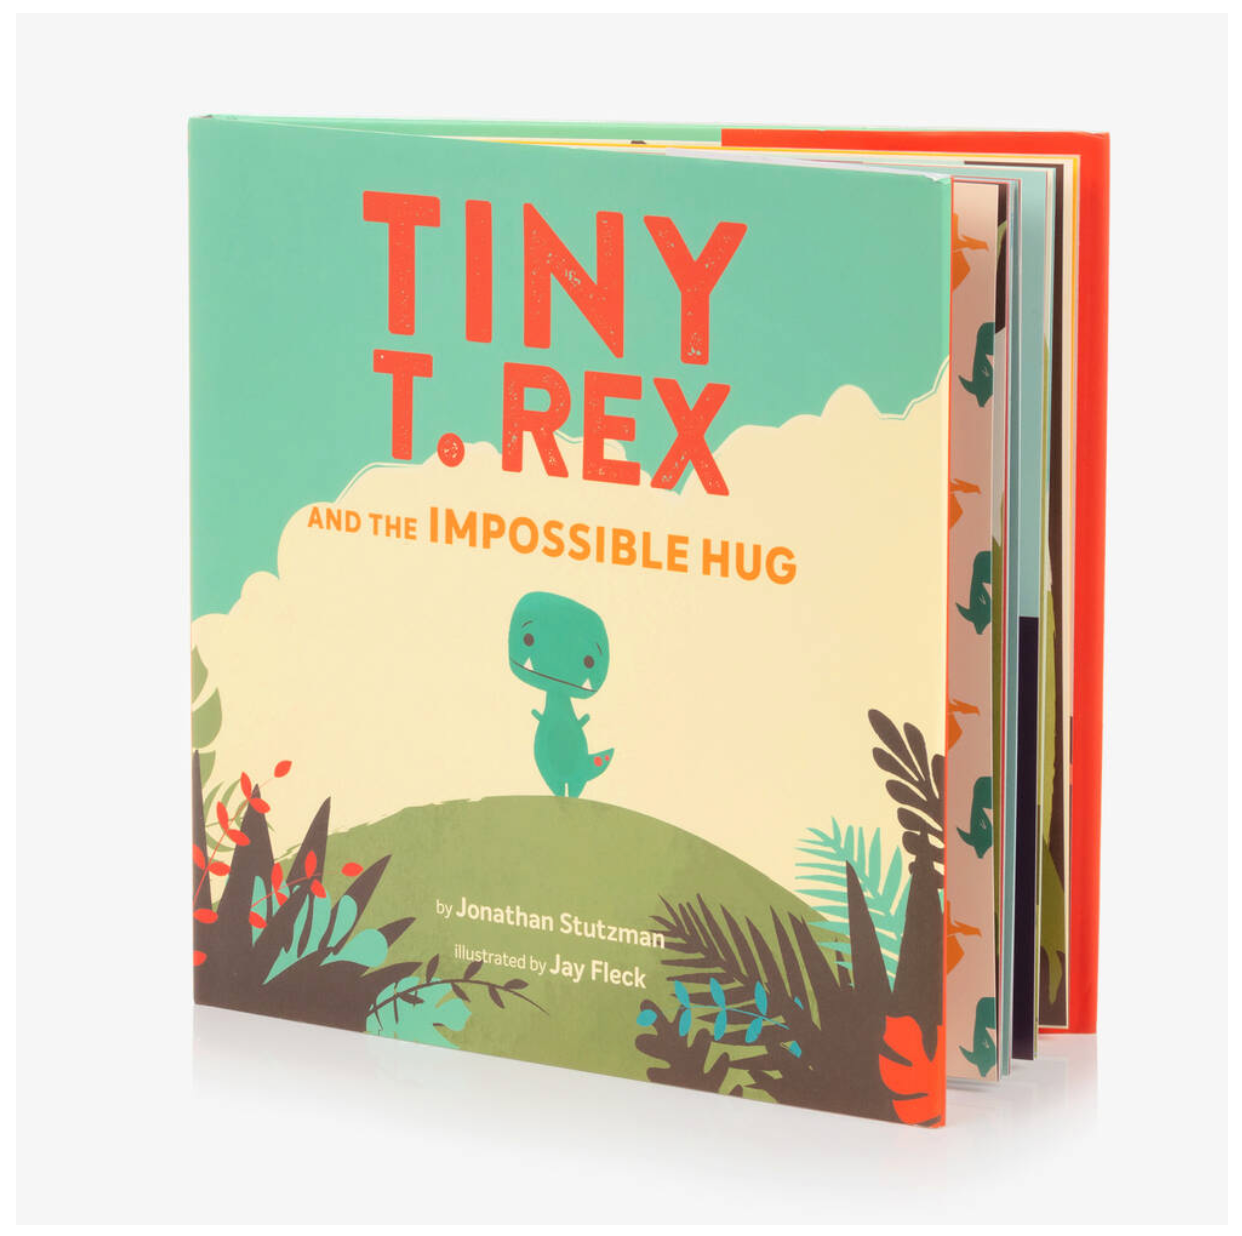 Books to Bed - Tiny T-Rex Impossible Hug PJ Book Set